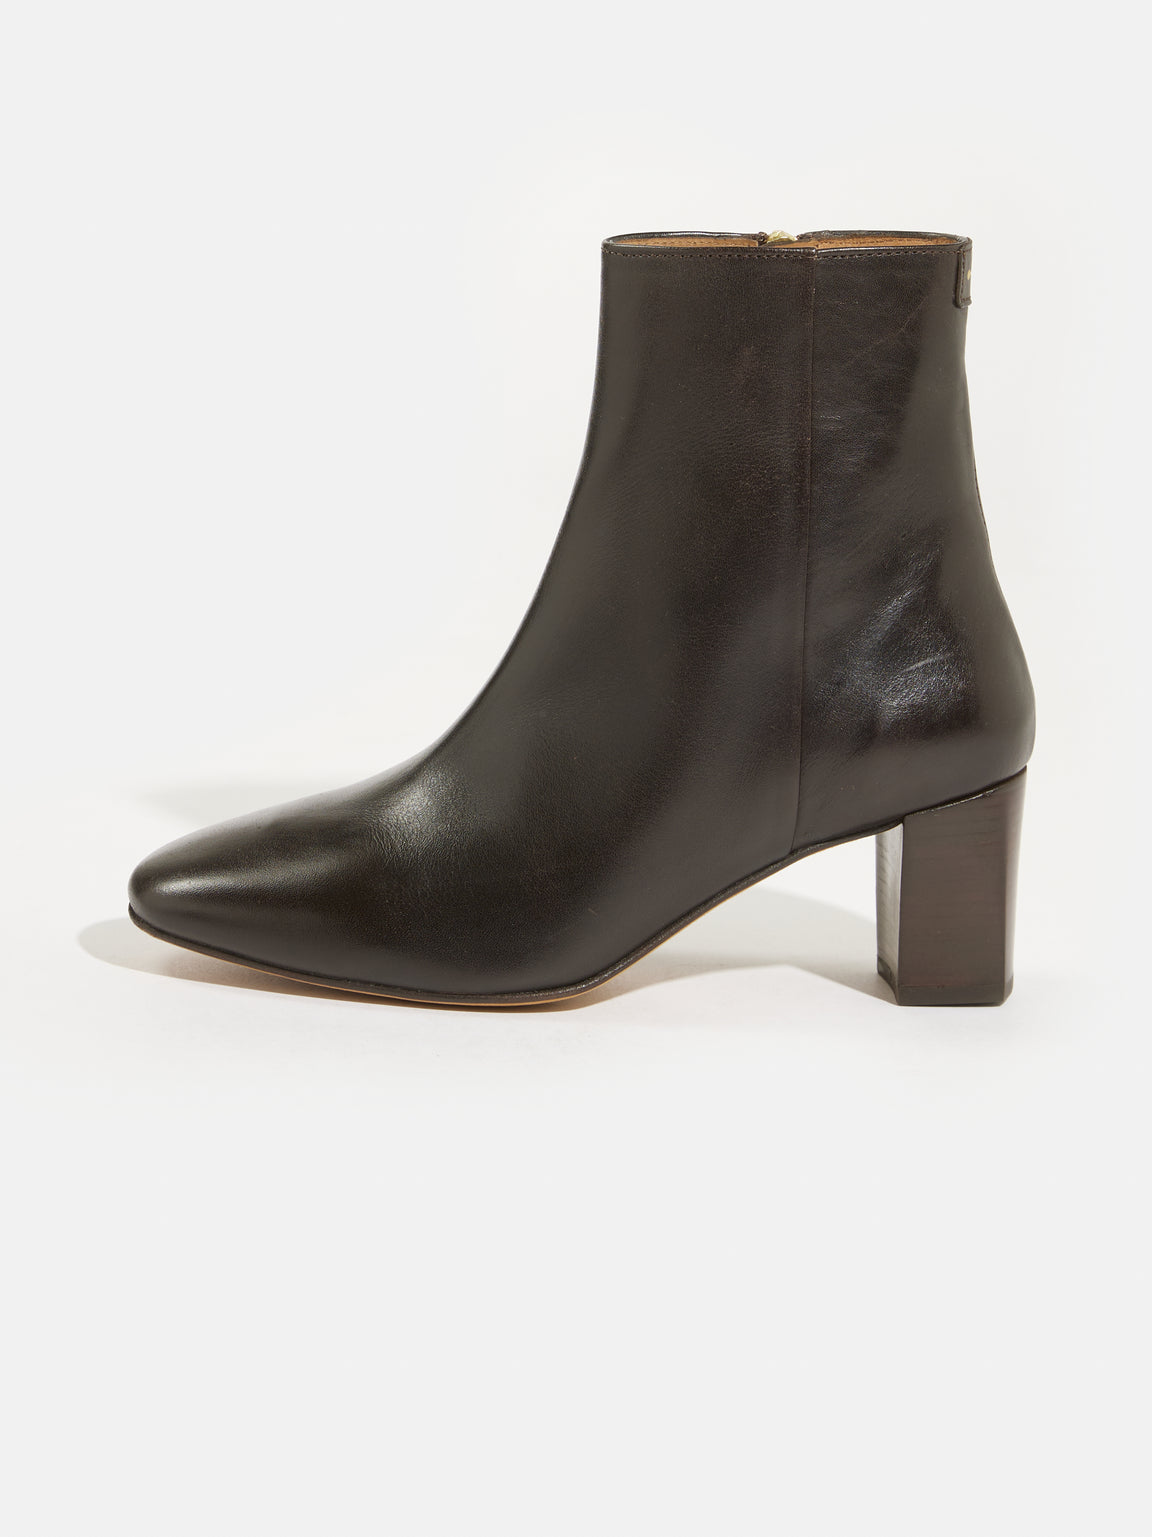 ANTHOLOGY | DAPHNE ANKLE BOOTS FOR WOMEN DARK BROWN